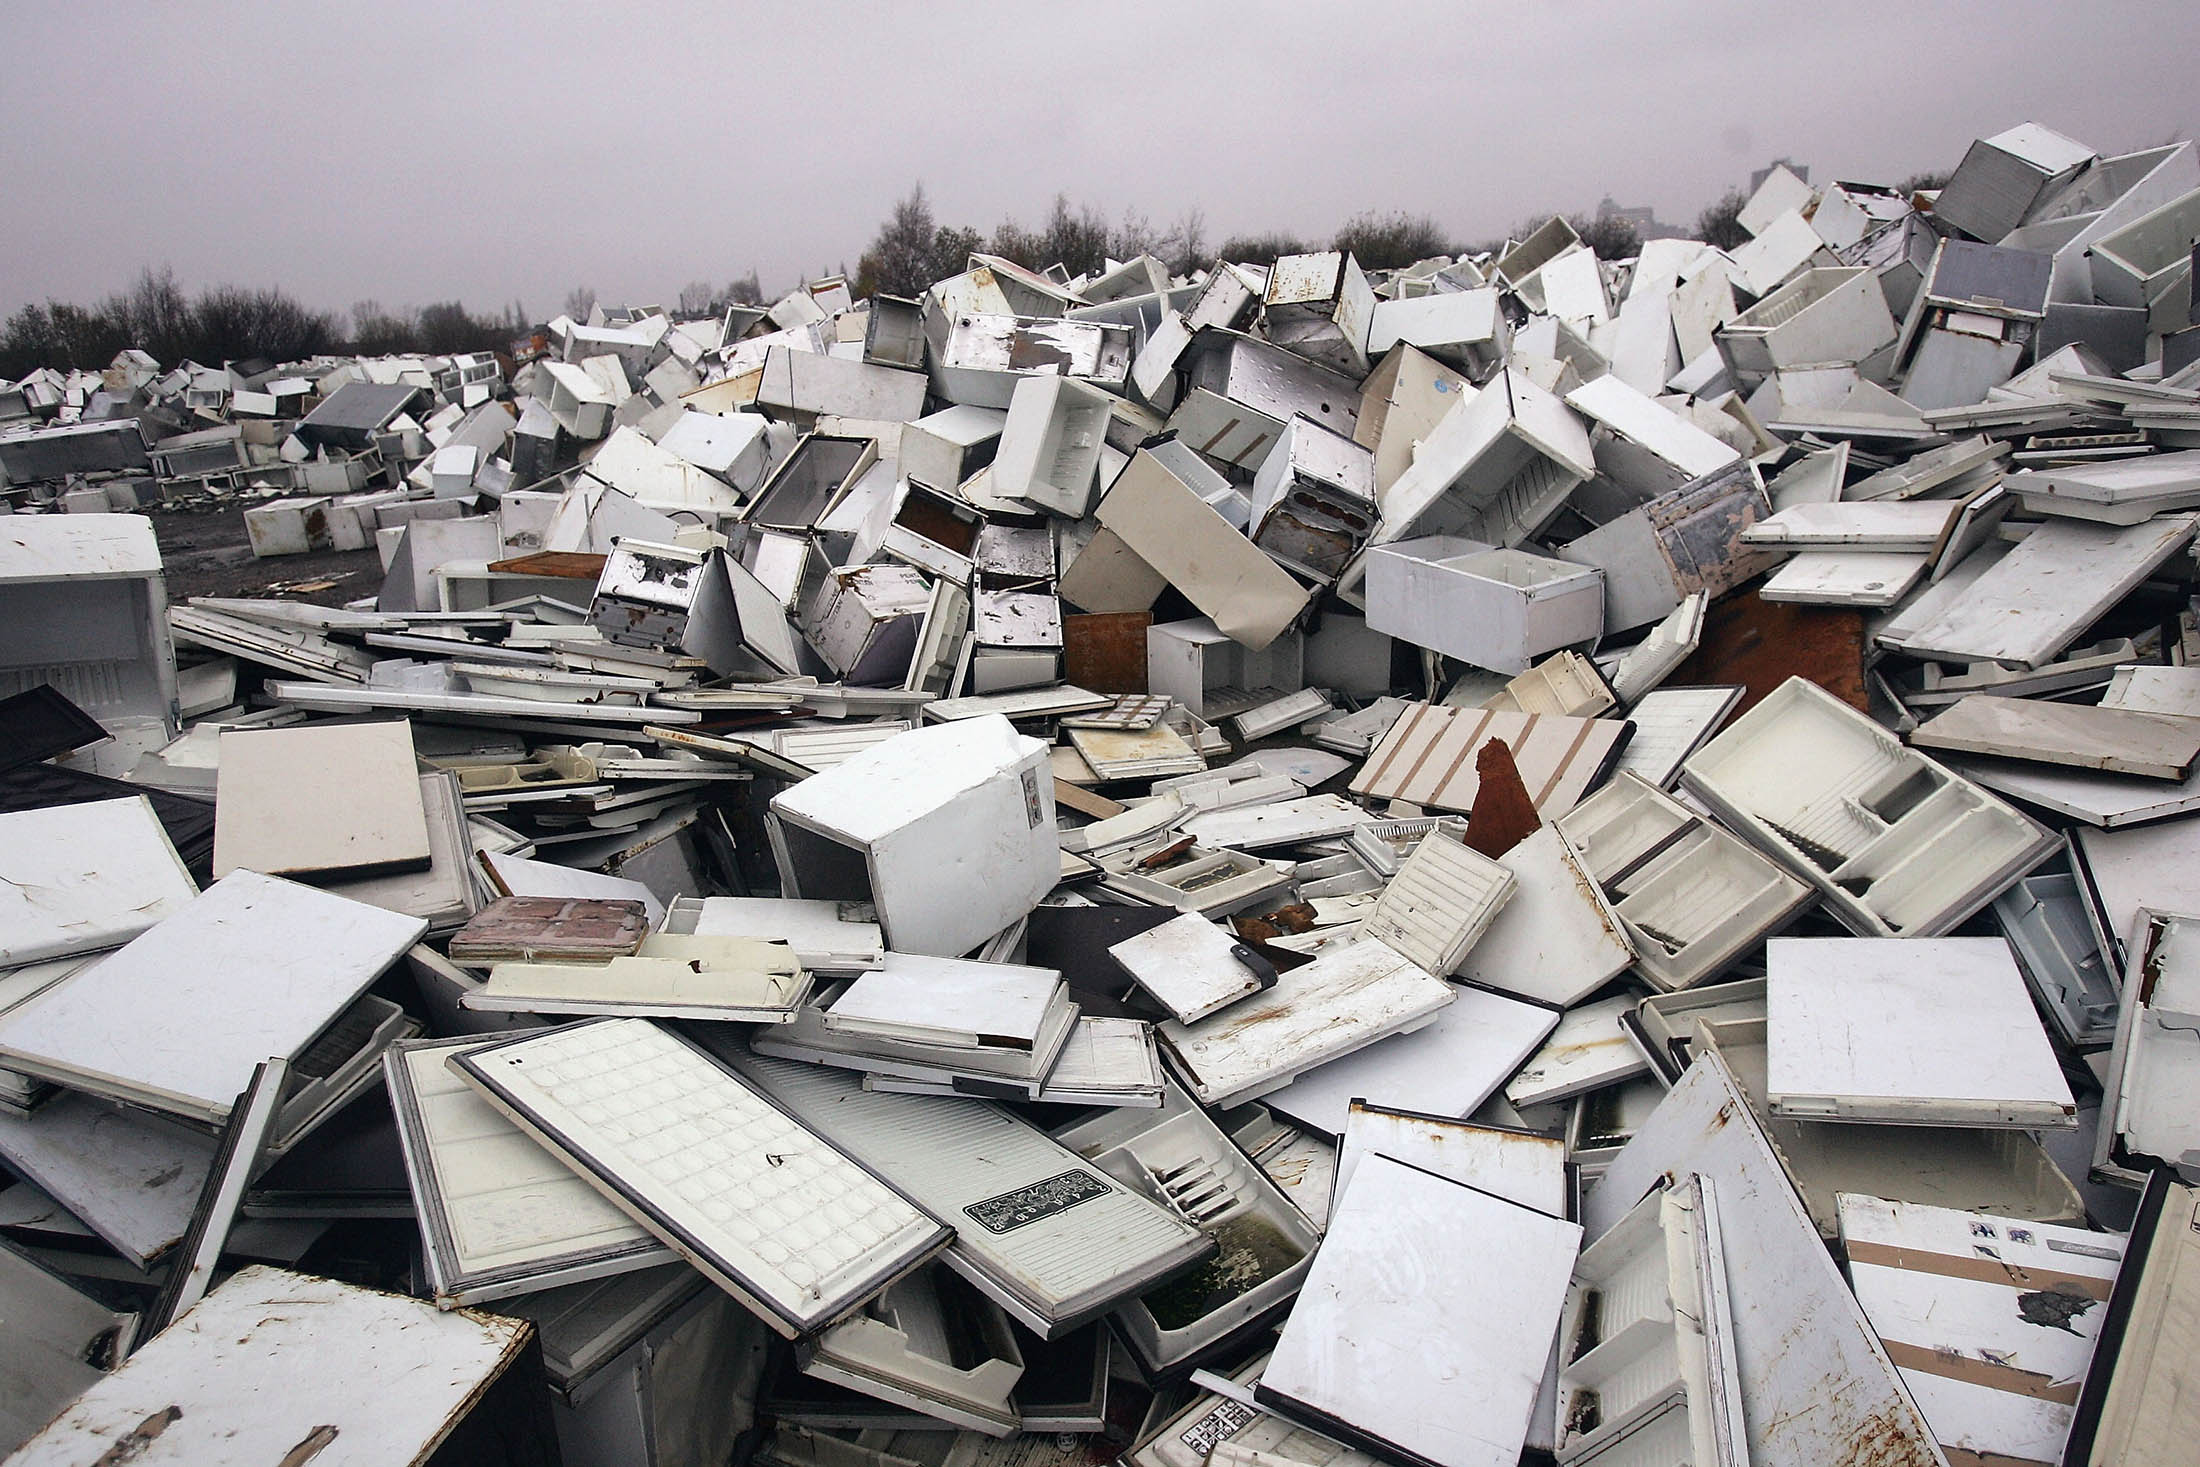 A mountain of discarded fridges are shown at a fridge disposal site in Trafford Park Industrial area in Manchester.
